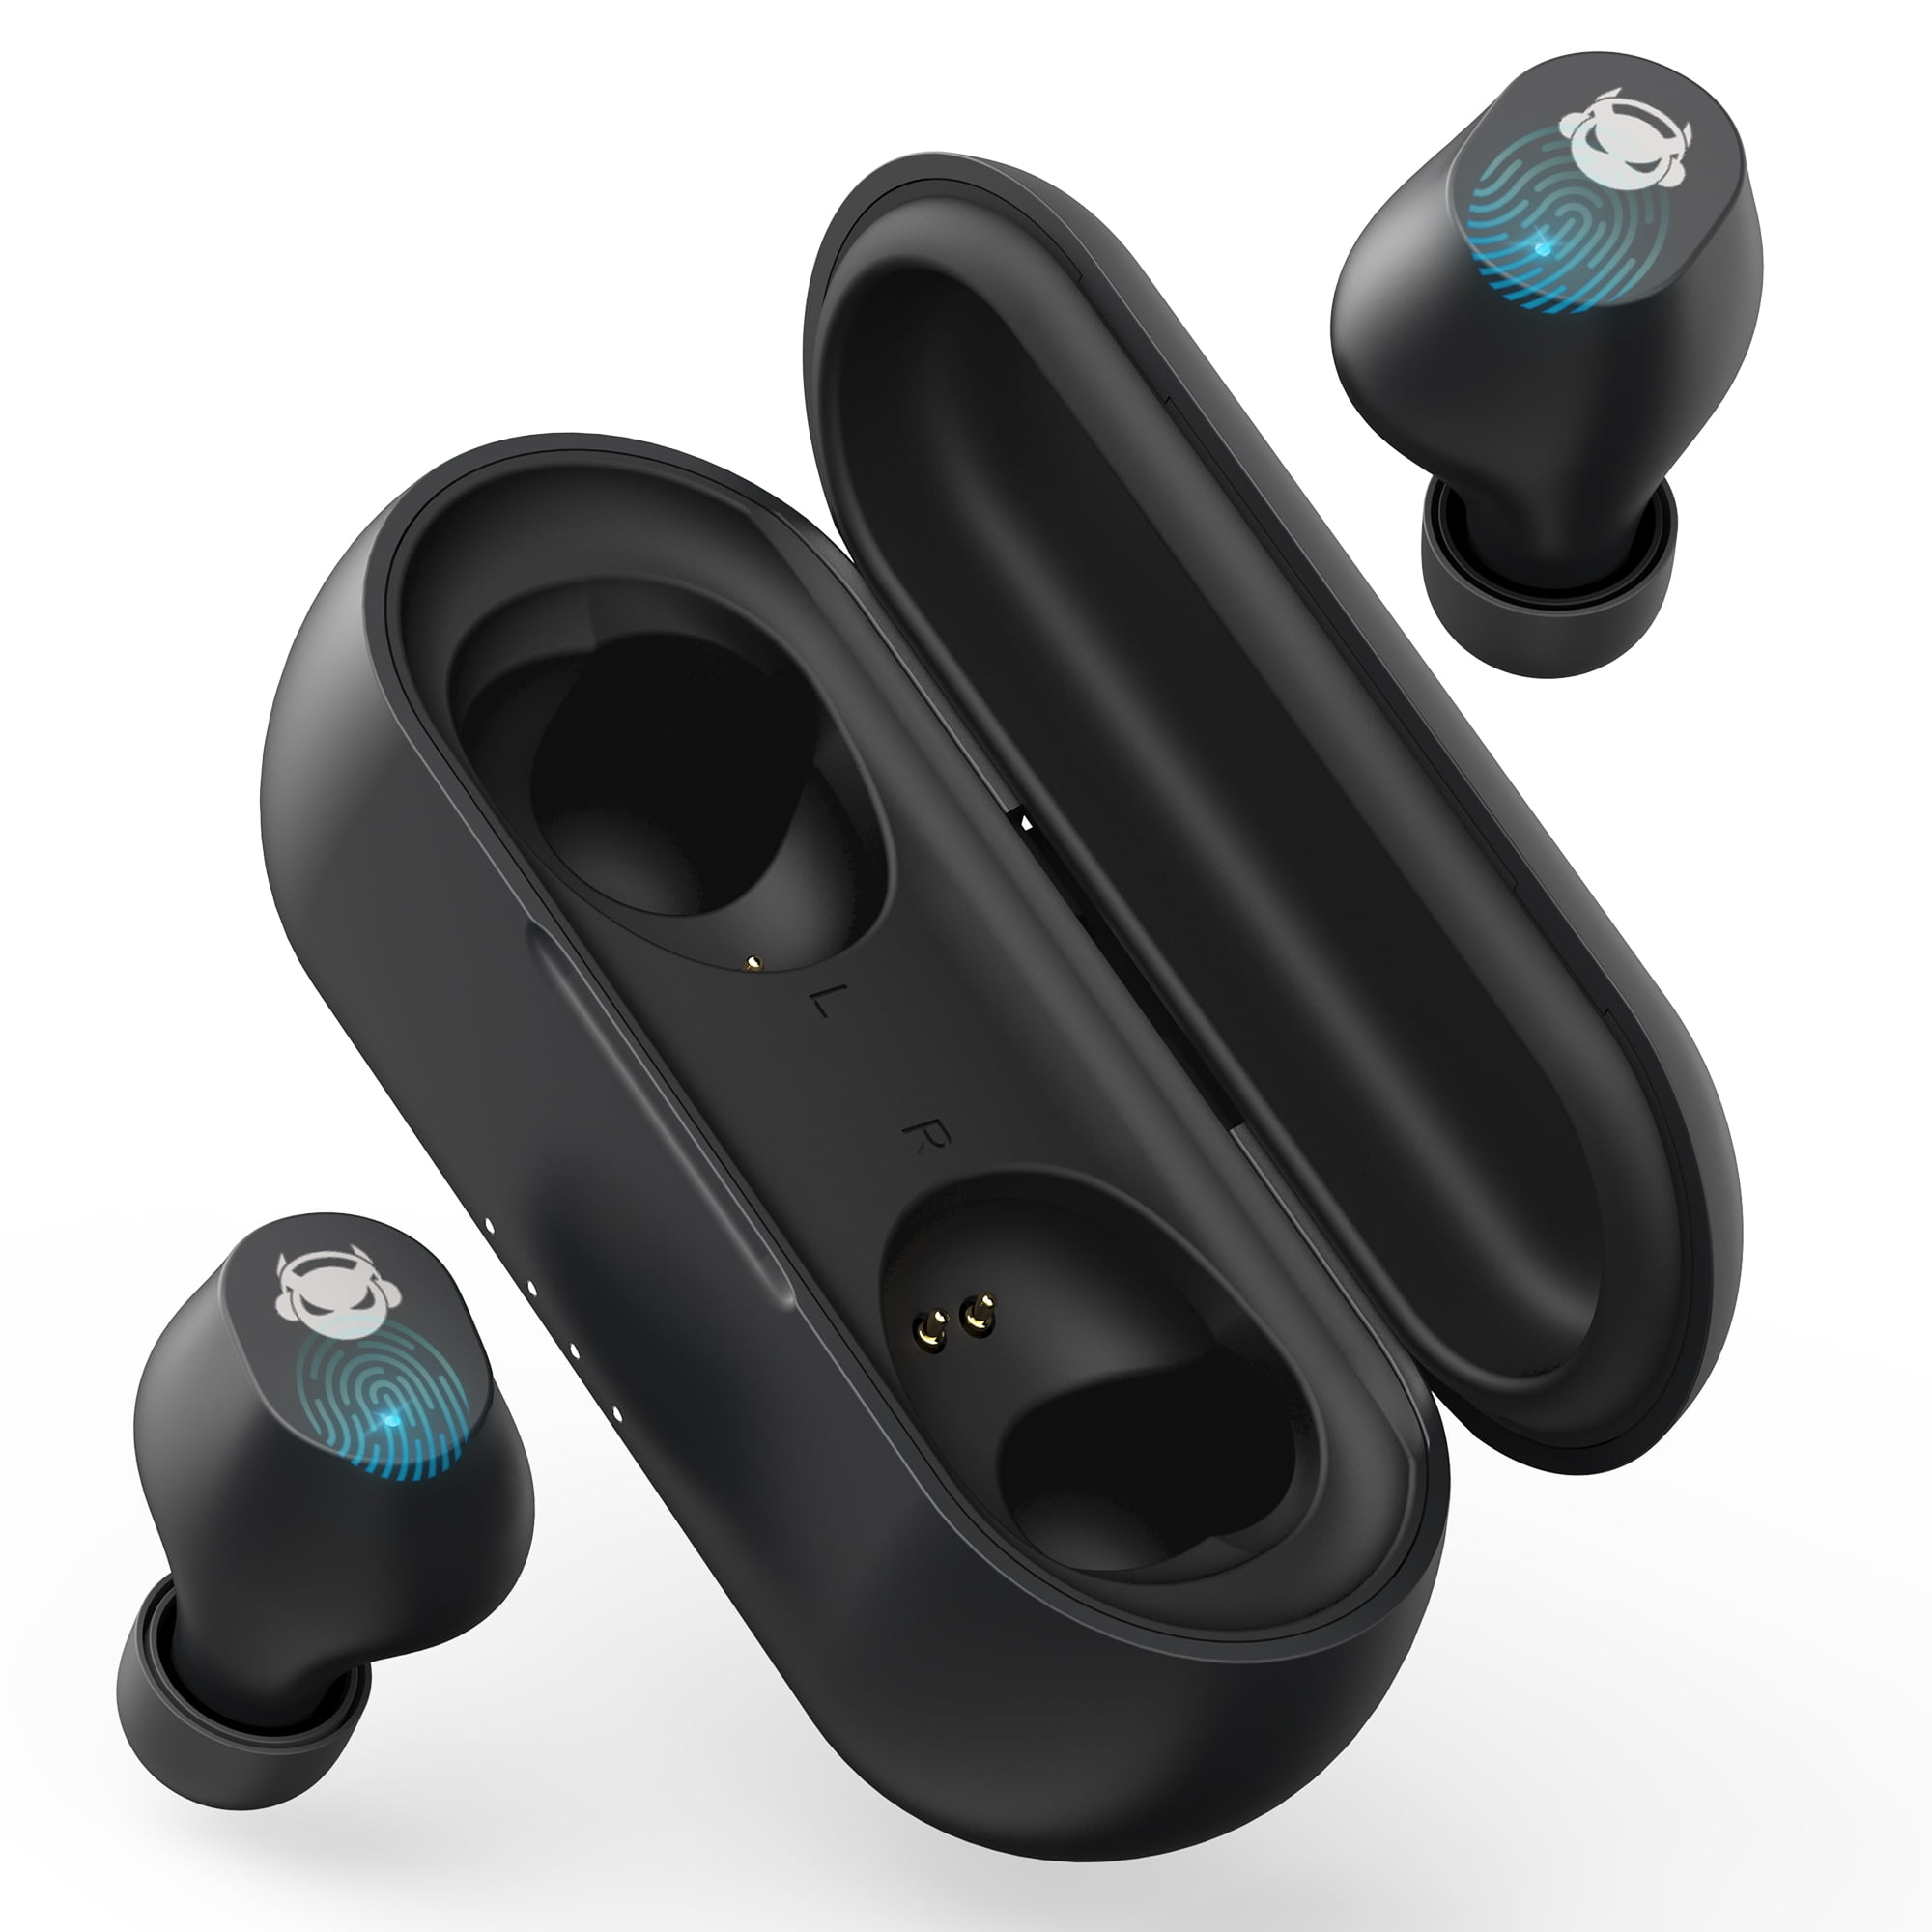 Panasonic True Wireless Earbuds, Noise Cancelling Bluetooth Headphones,  IPX4 Water Resistant and Compatible with Alexa, Charging Case Included - RZ-S500W  (Black)